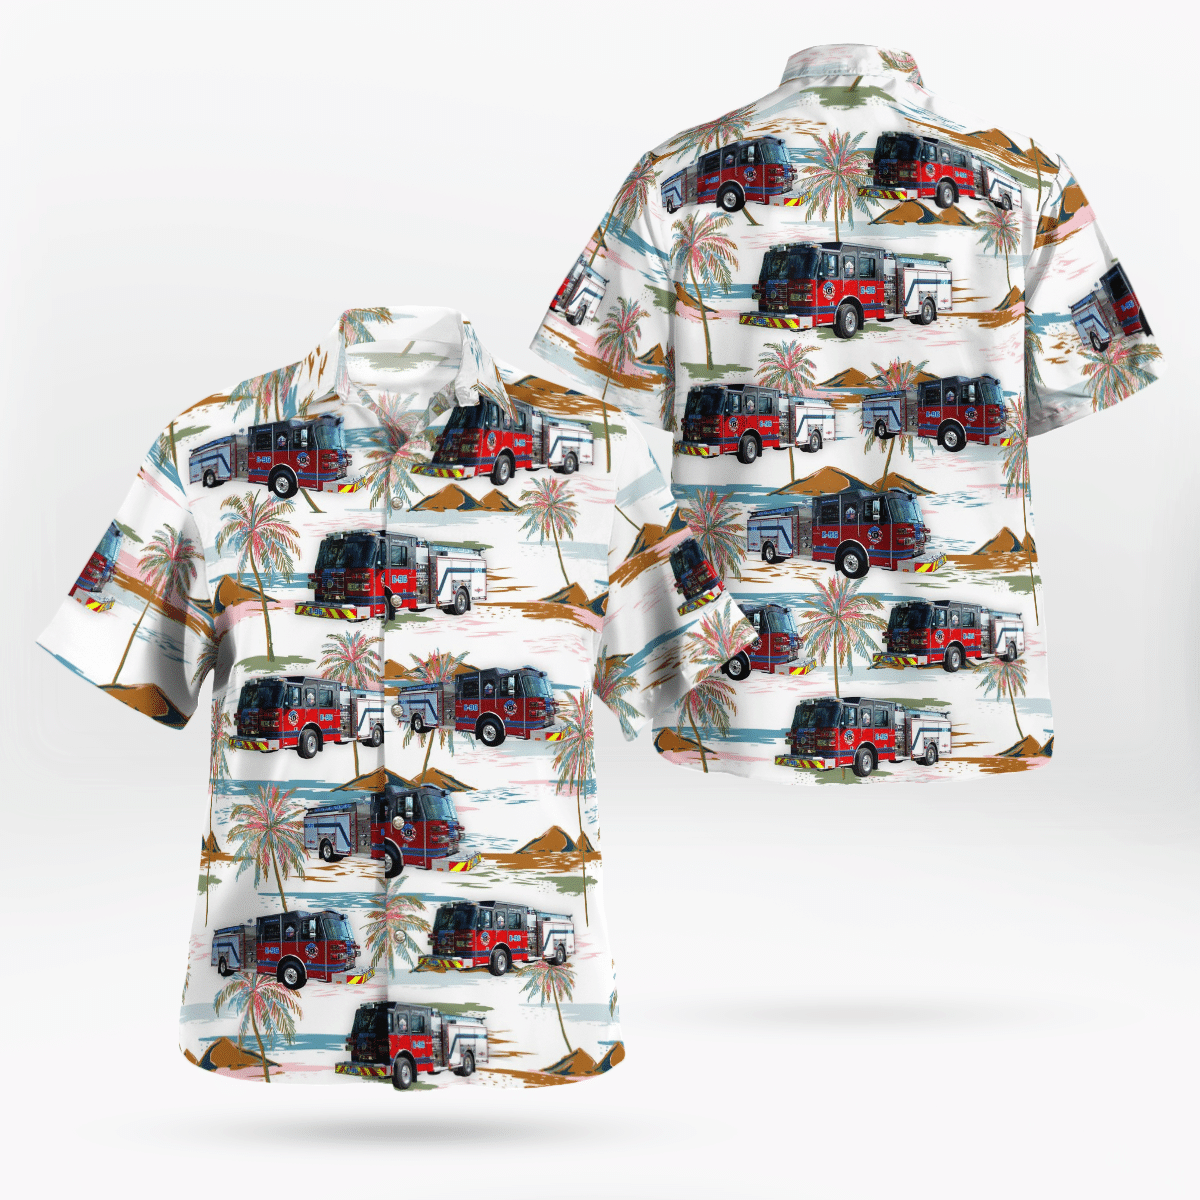 If you are in need of a new summertime look, pick up this Hawaiian shirt 99